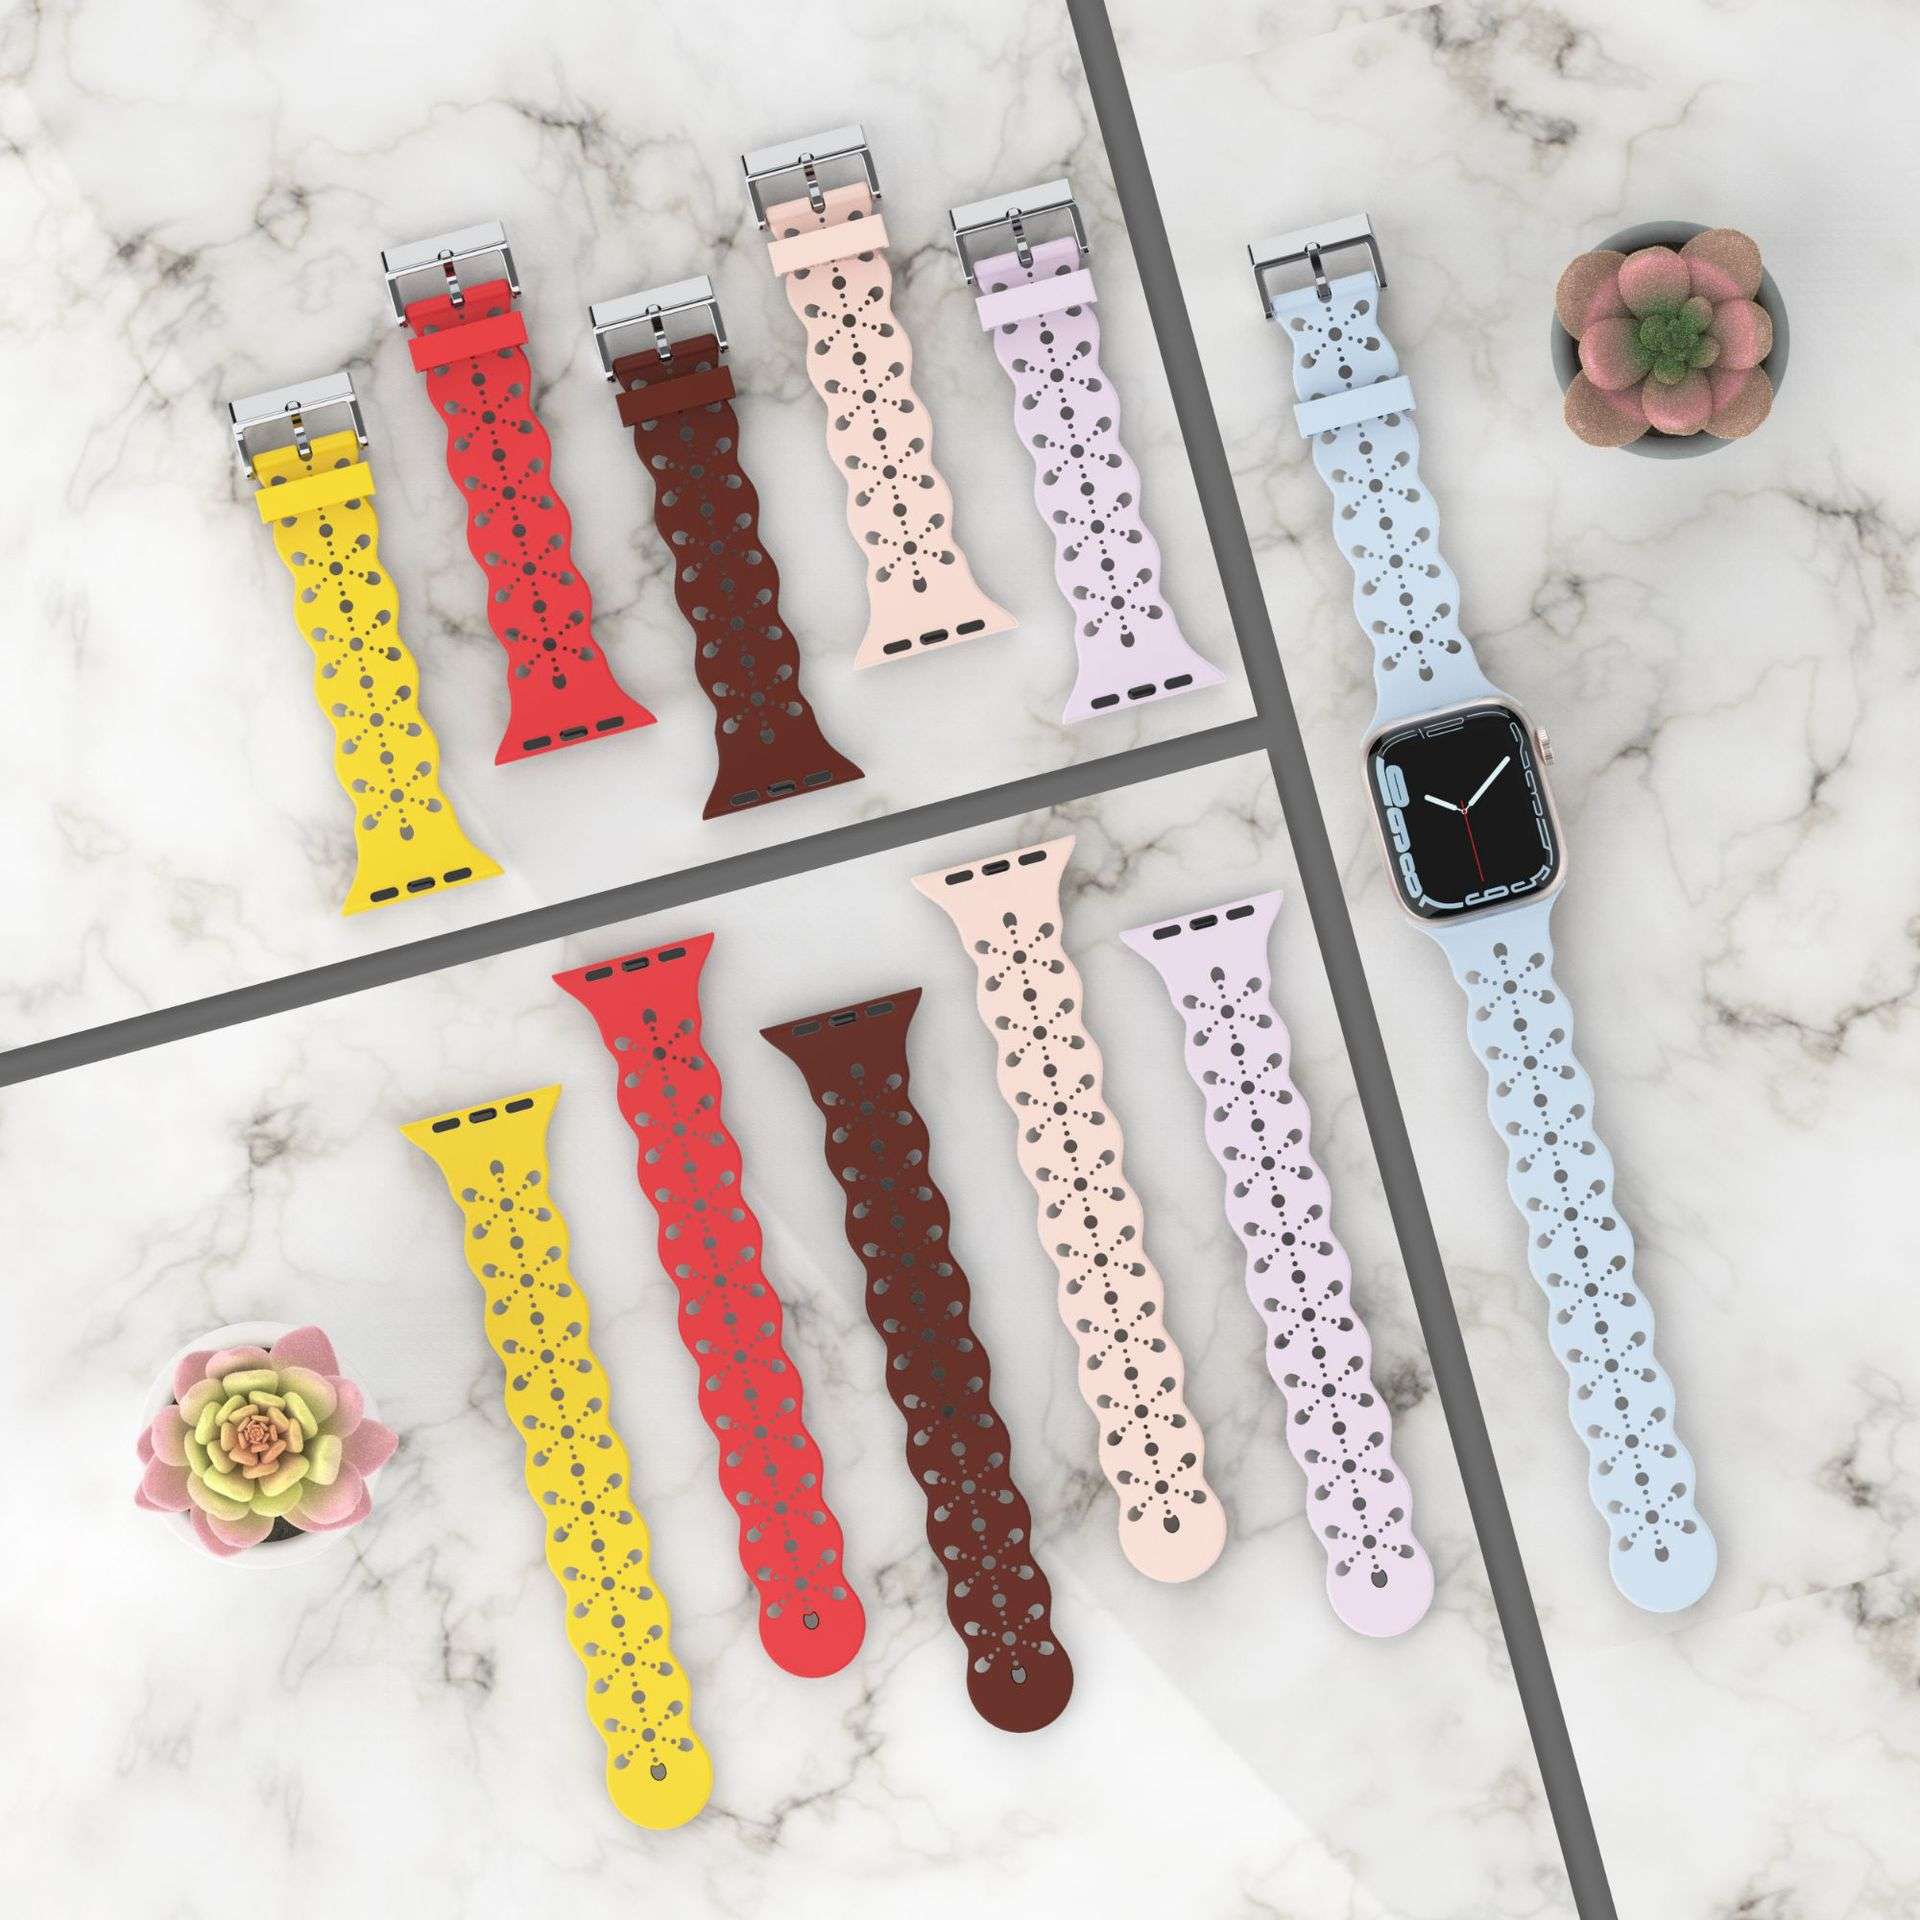 38/40/41 MM Lavendar Feminine Lace Silicone Band for Apple Watches